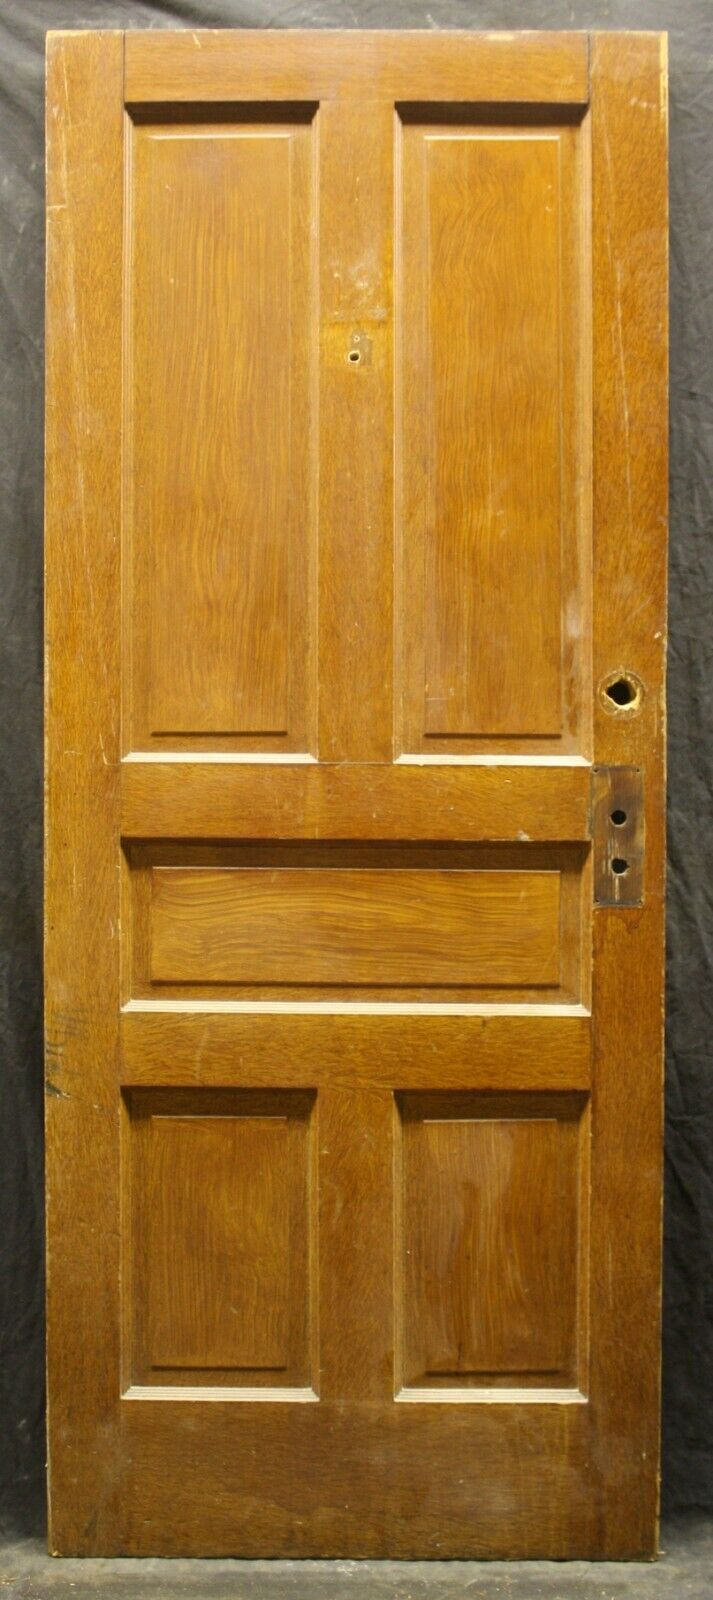 31.5"x79" Antique Vintage Old Reclaimed Salvaged SOLID Wood Wooden Interior Doors 5 Panels